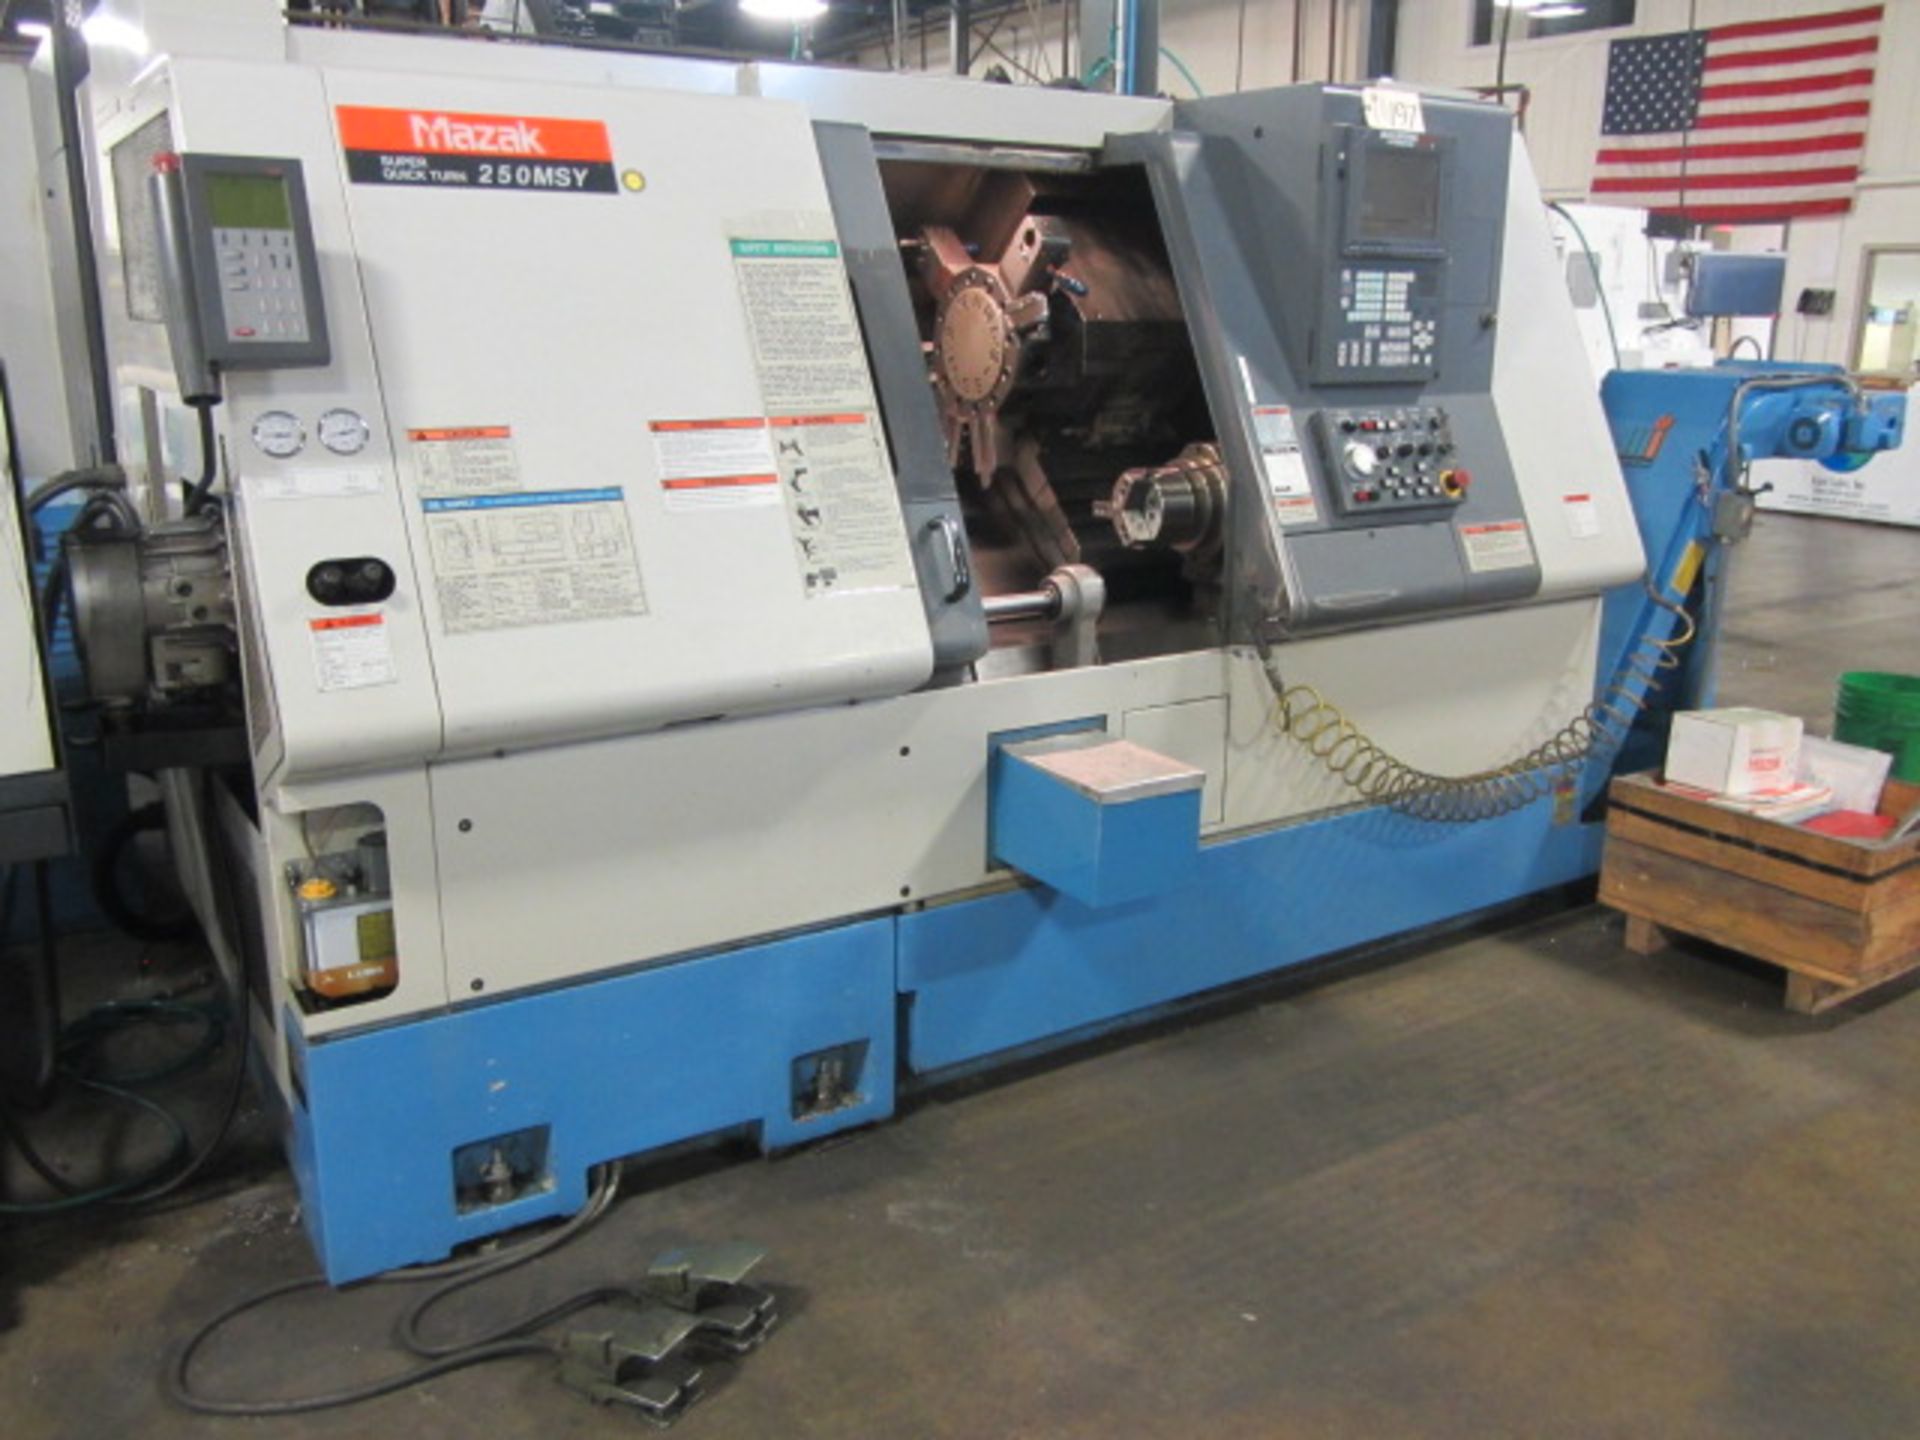 Mazak Super Quick Turn 250-MSY CNC Turning Center with Sub-Spindle, Milling & Y-Axis, 12 Position - Bild 5 aus 8